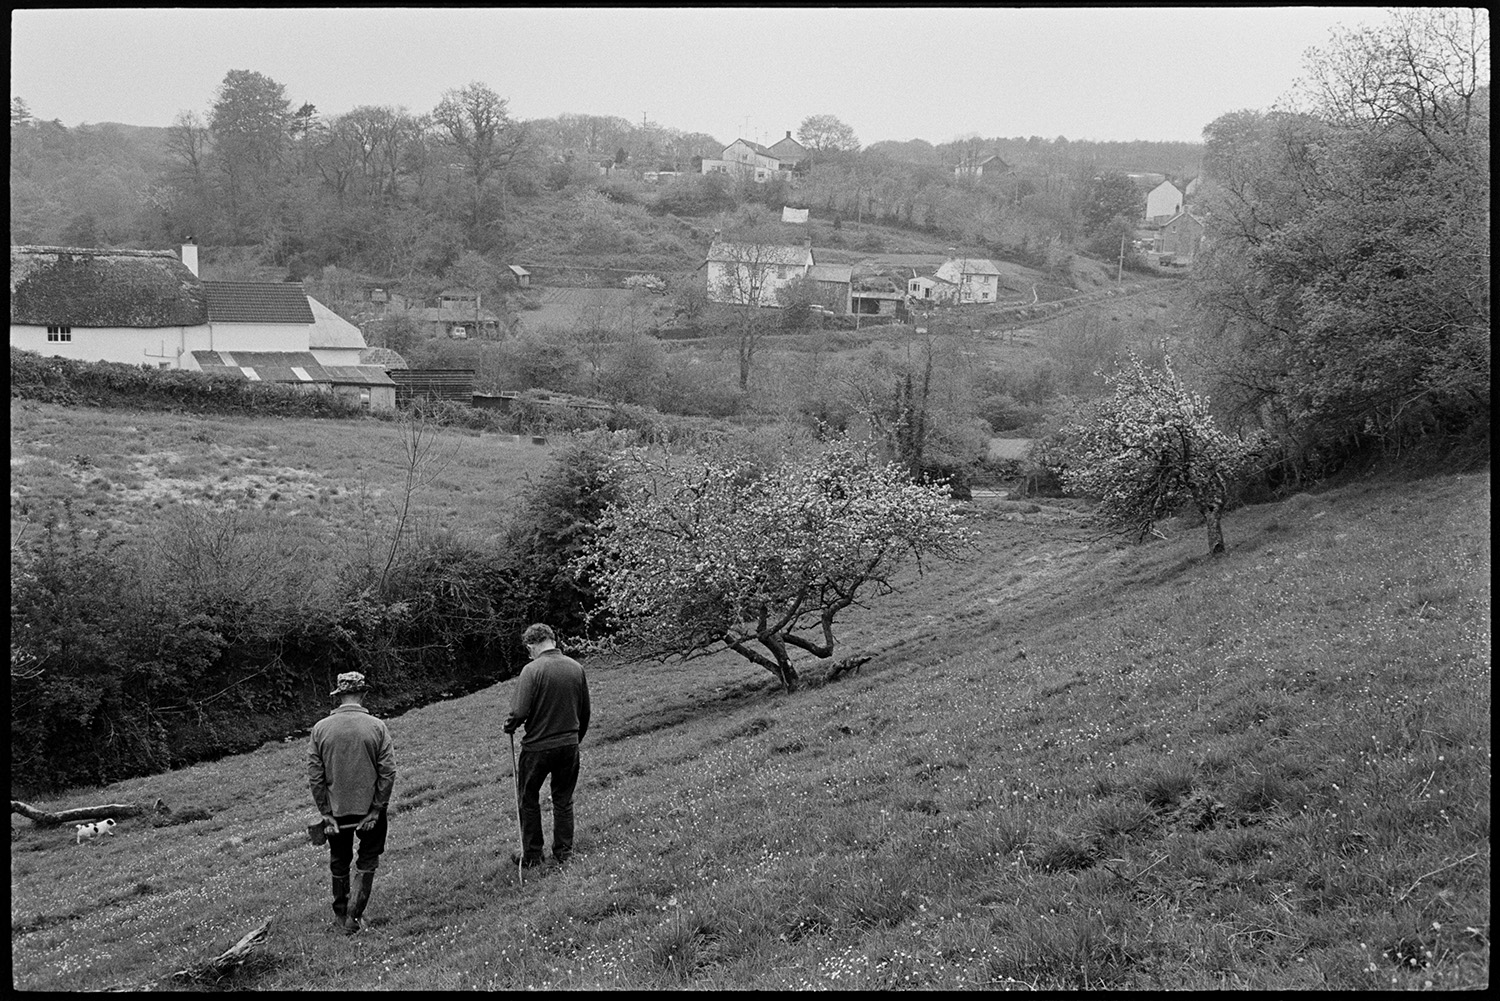 Farmers walking across orchard with Dexter cows. 
[Two men walking through an orchard with a dog, at Hollocombe. One of them is holding a hammer or mallet. Farm buildings and houses can be seen in the background.]